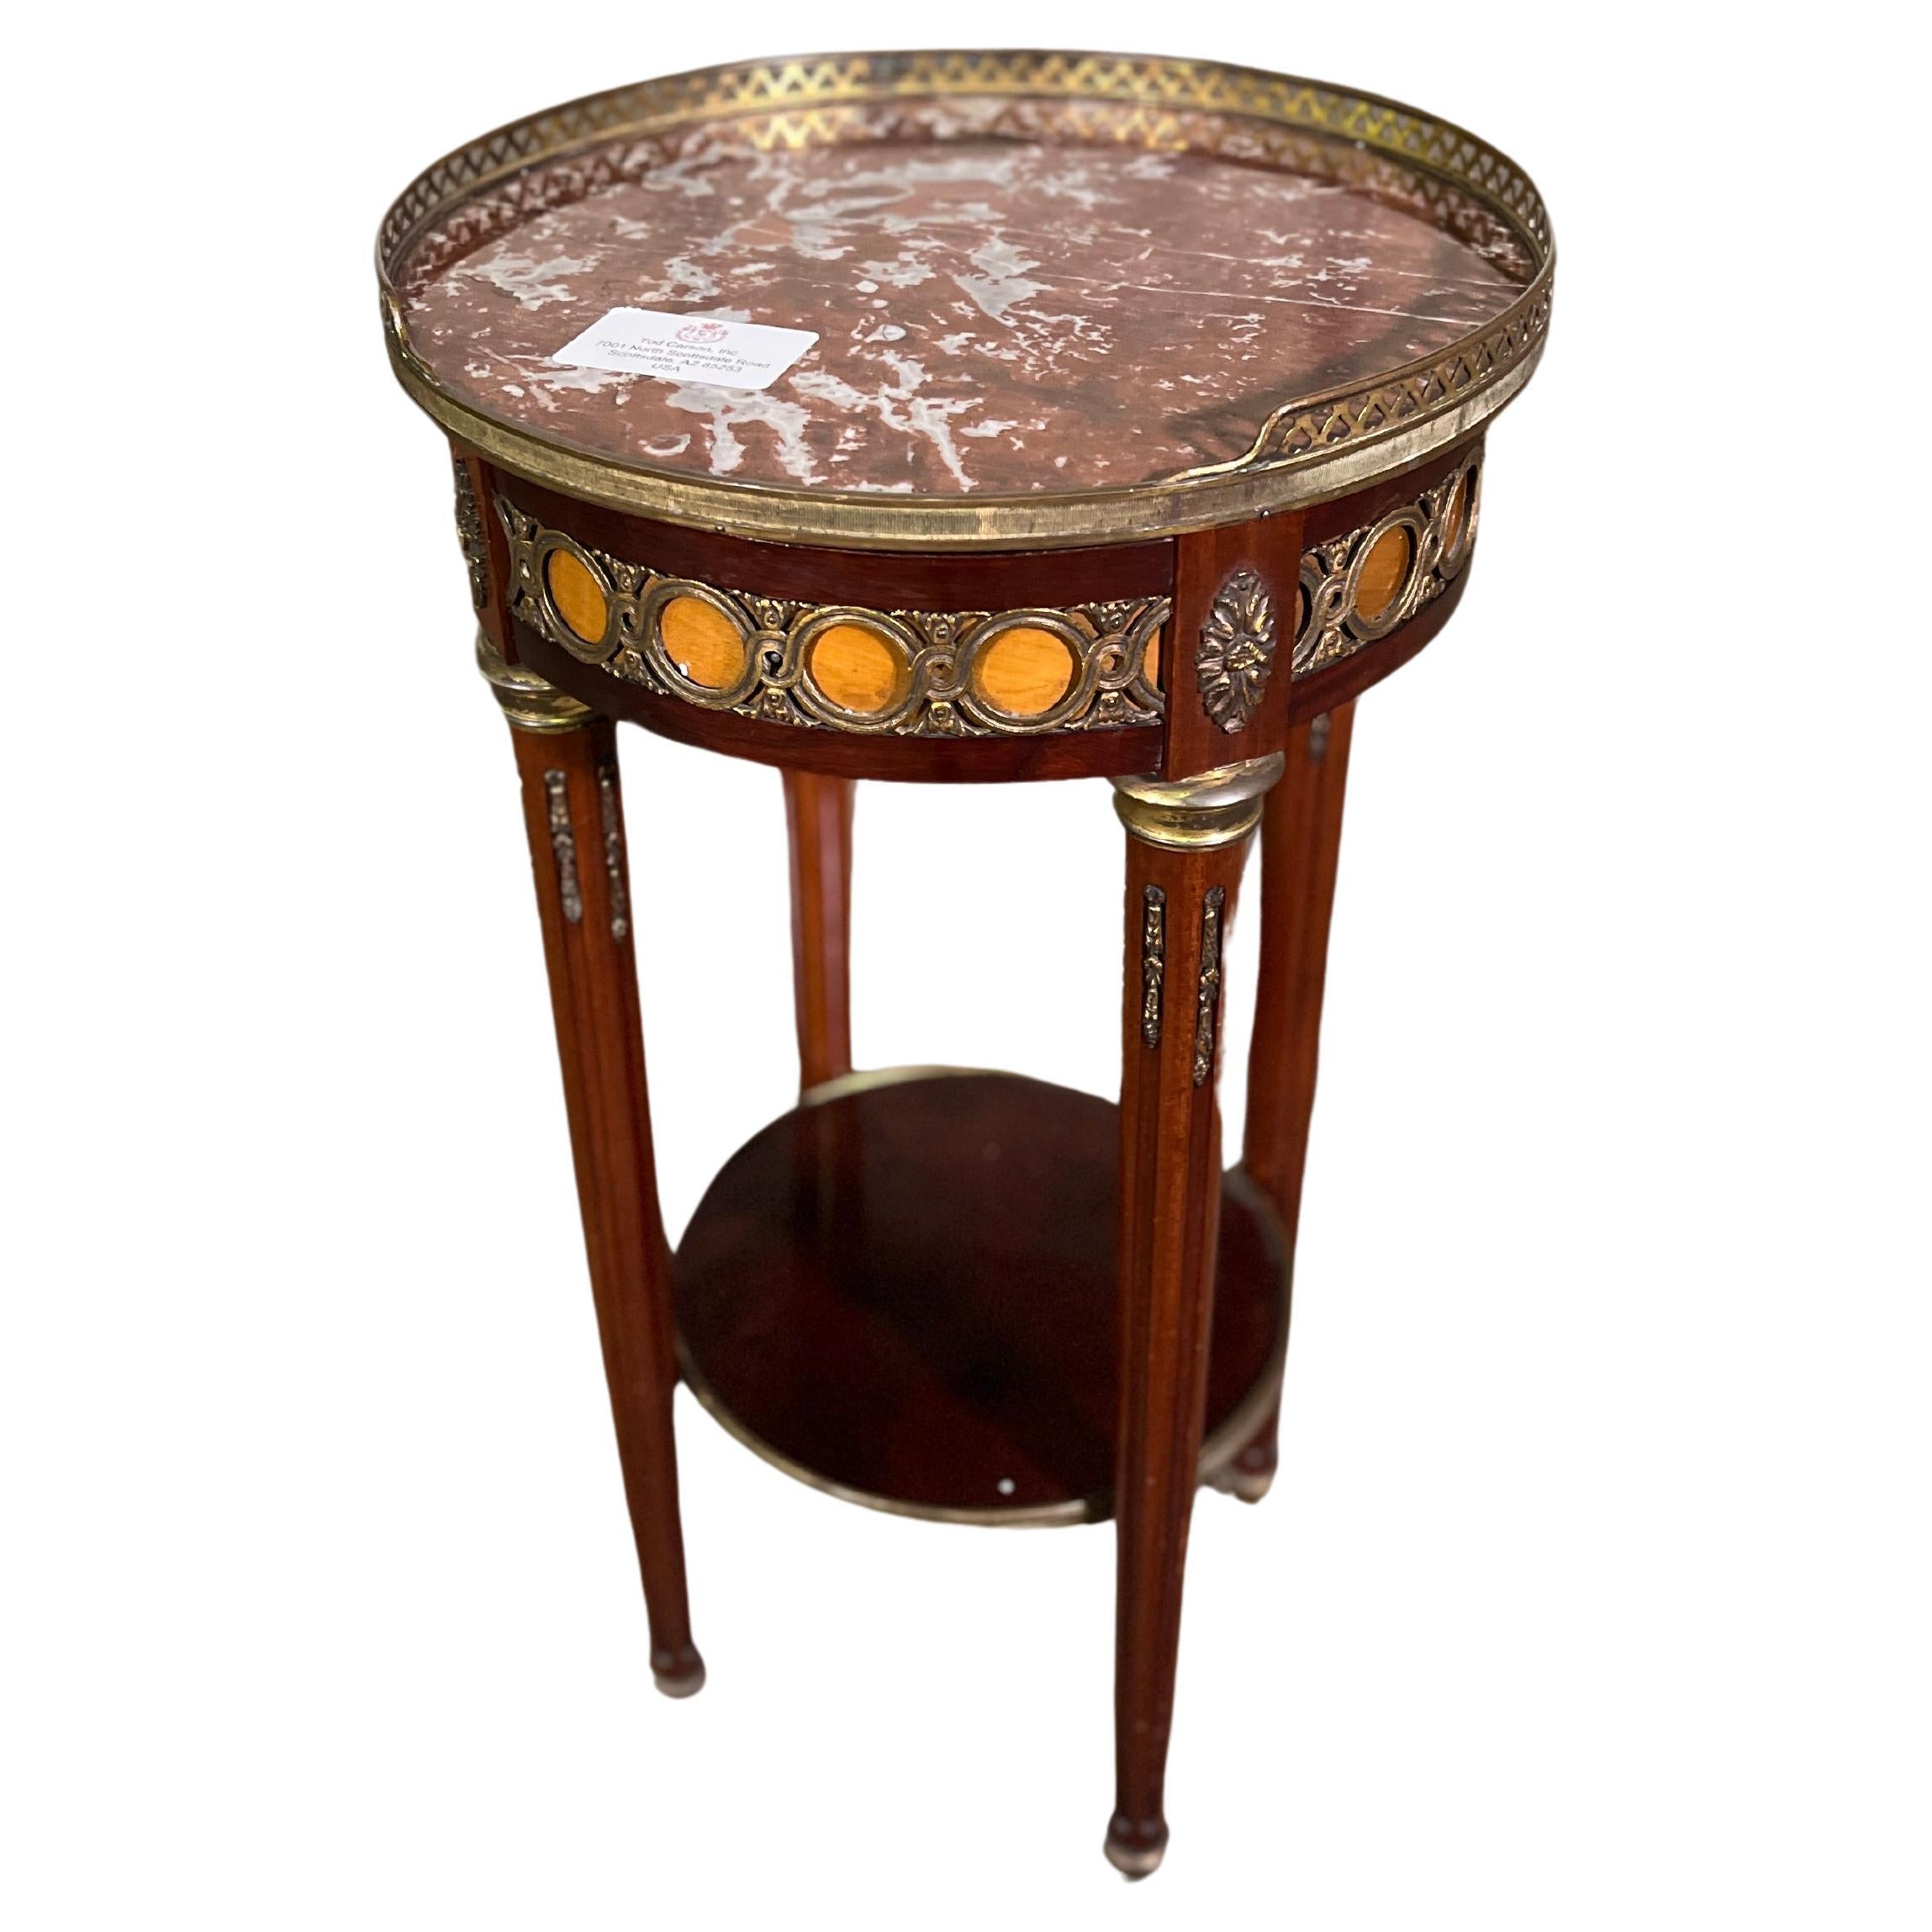 Mid 19th Century Transition Style Table - Brass Gallery For Sale